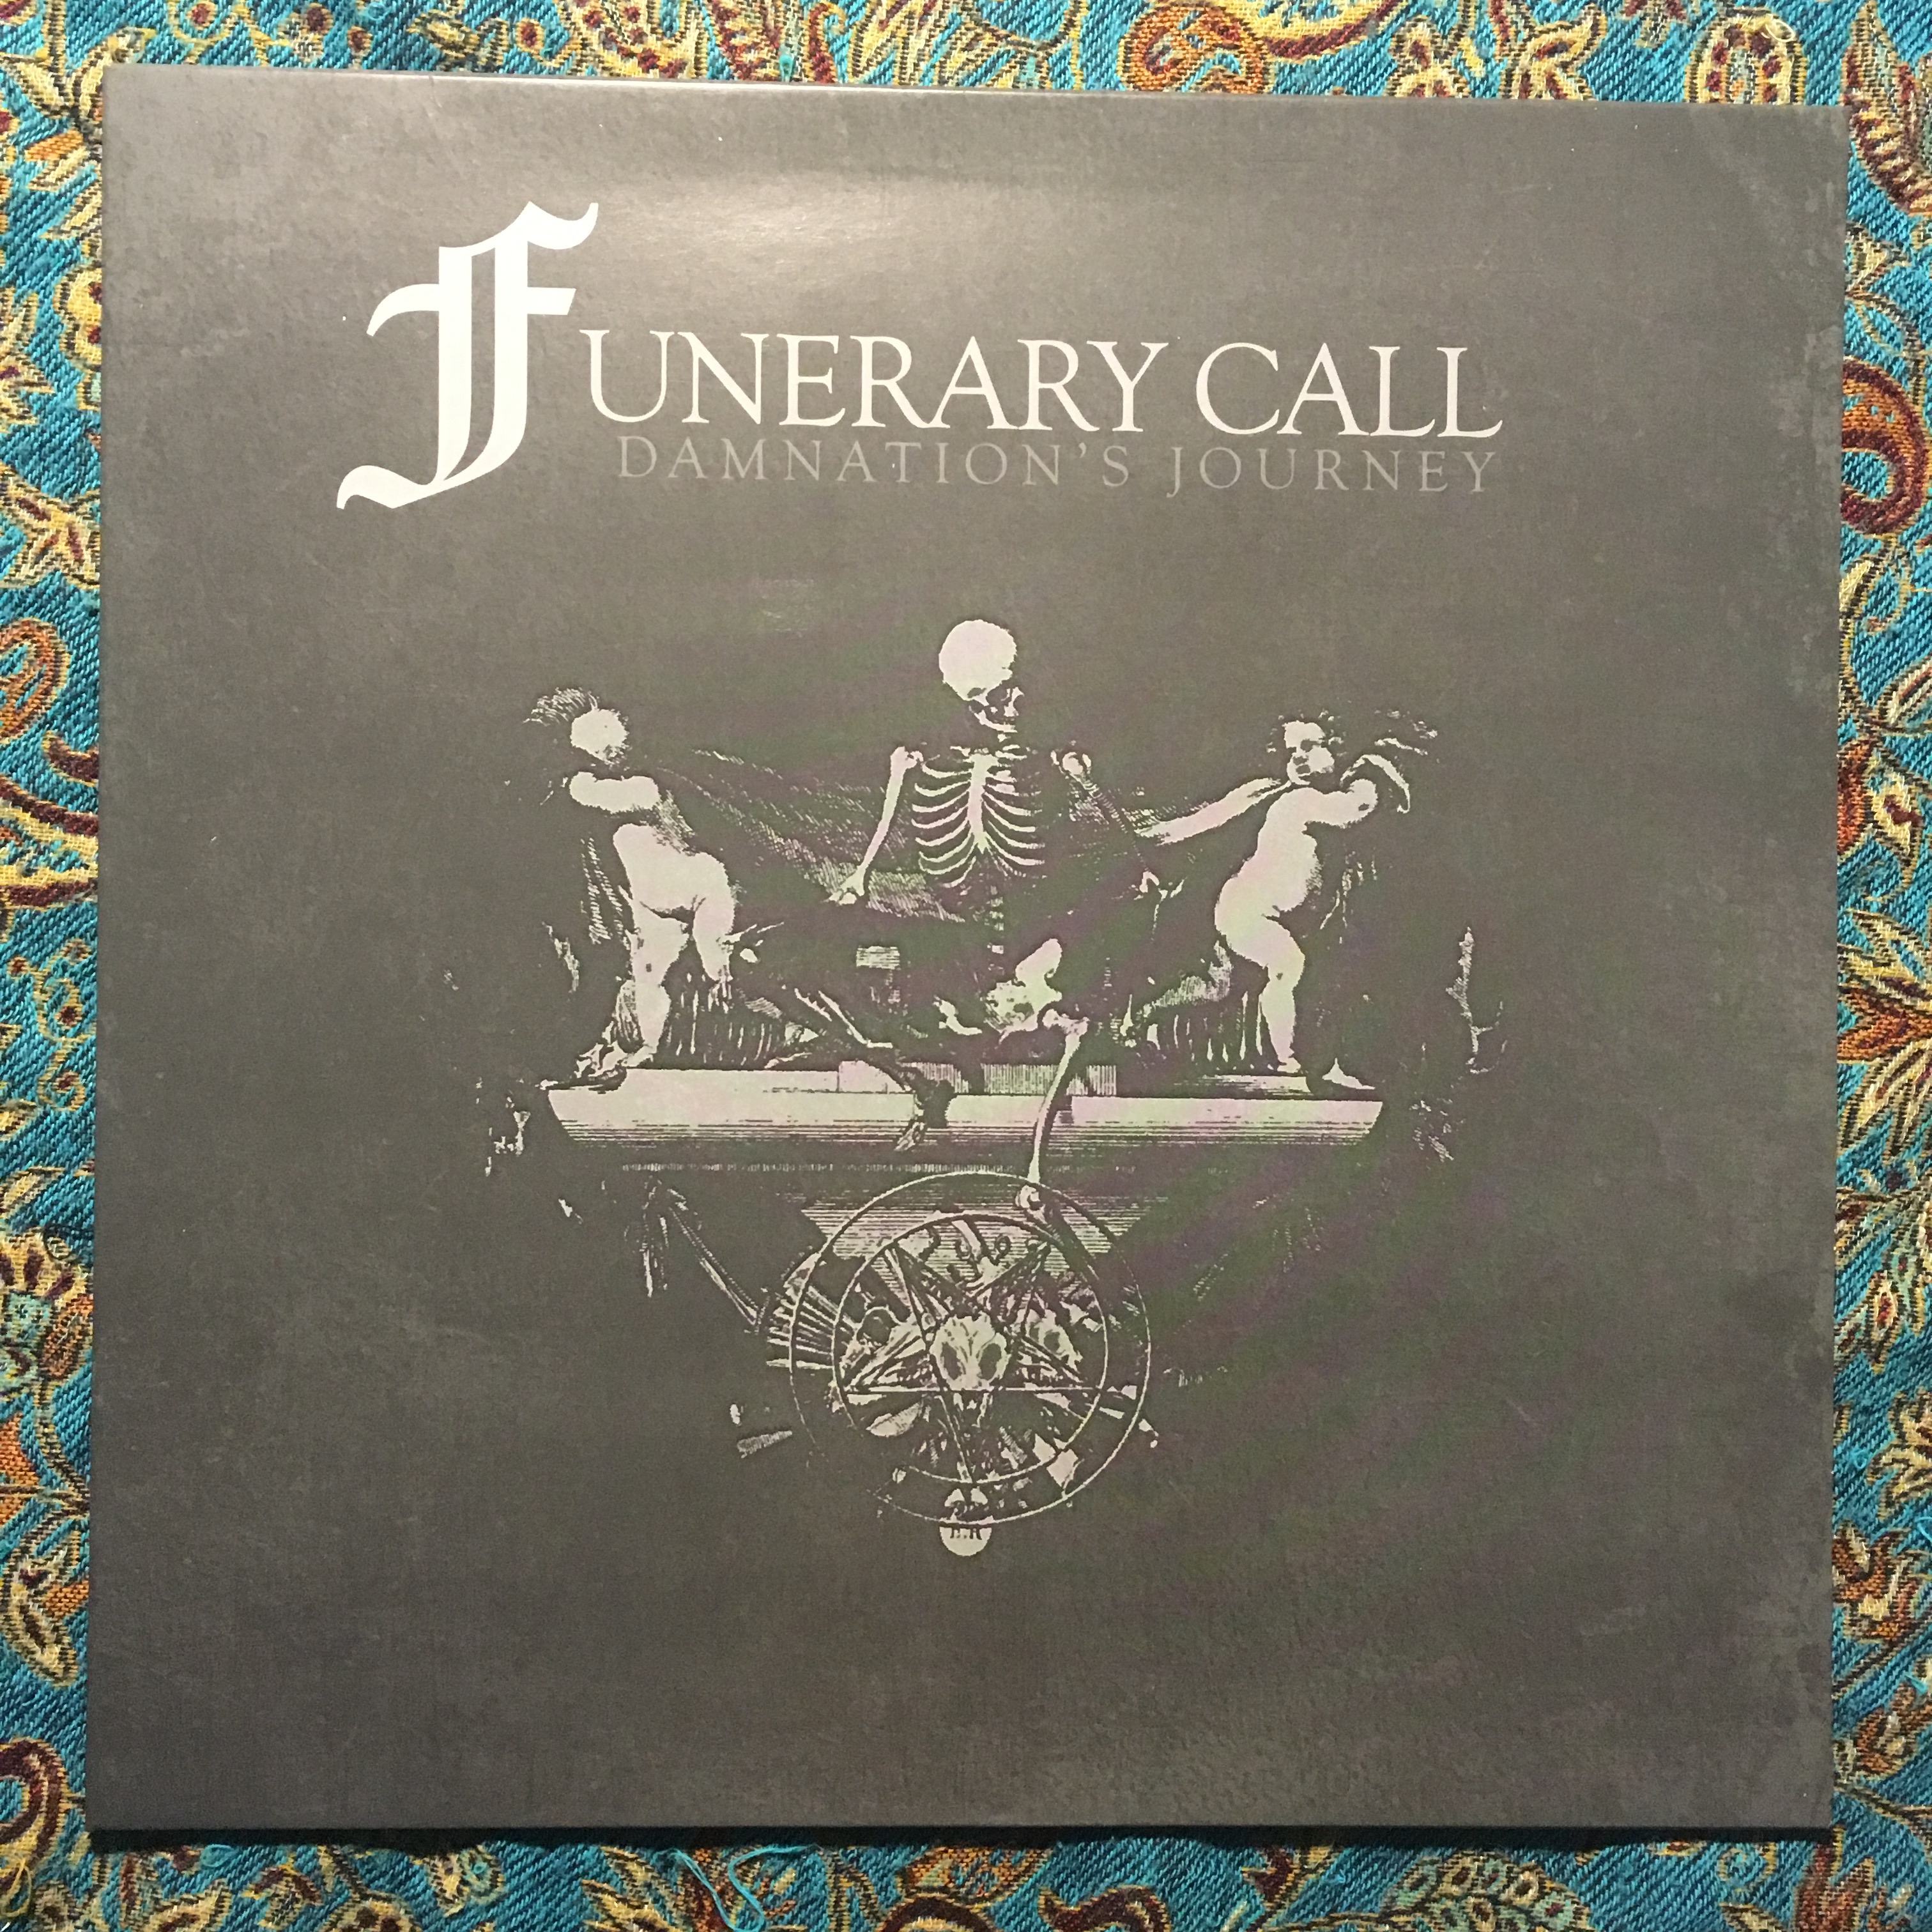 FUNERARY CALL – Damnation's Journey LP (Die Hard Edition)